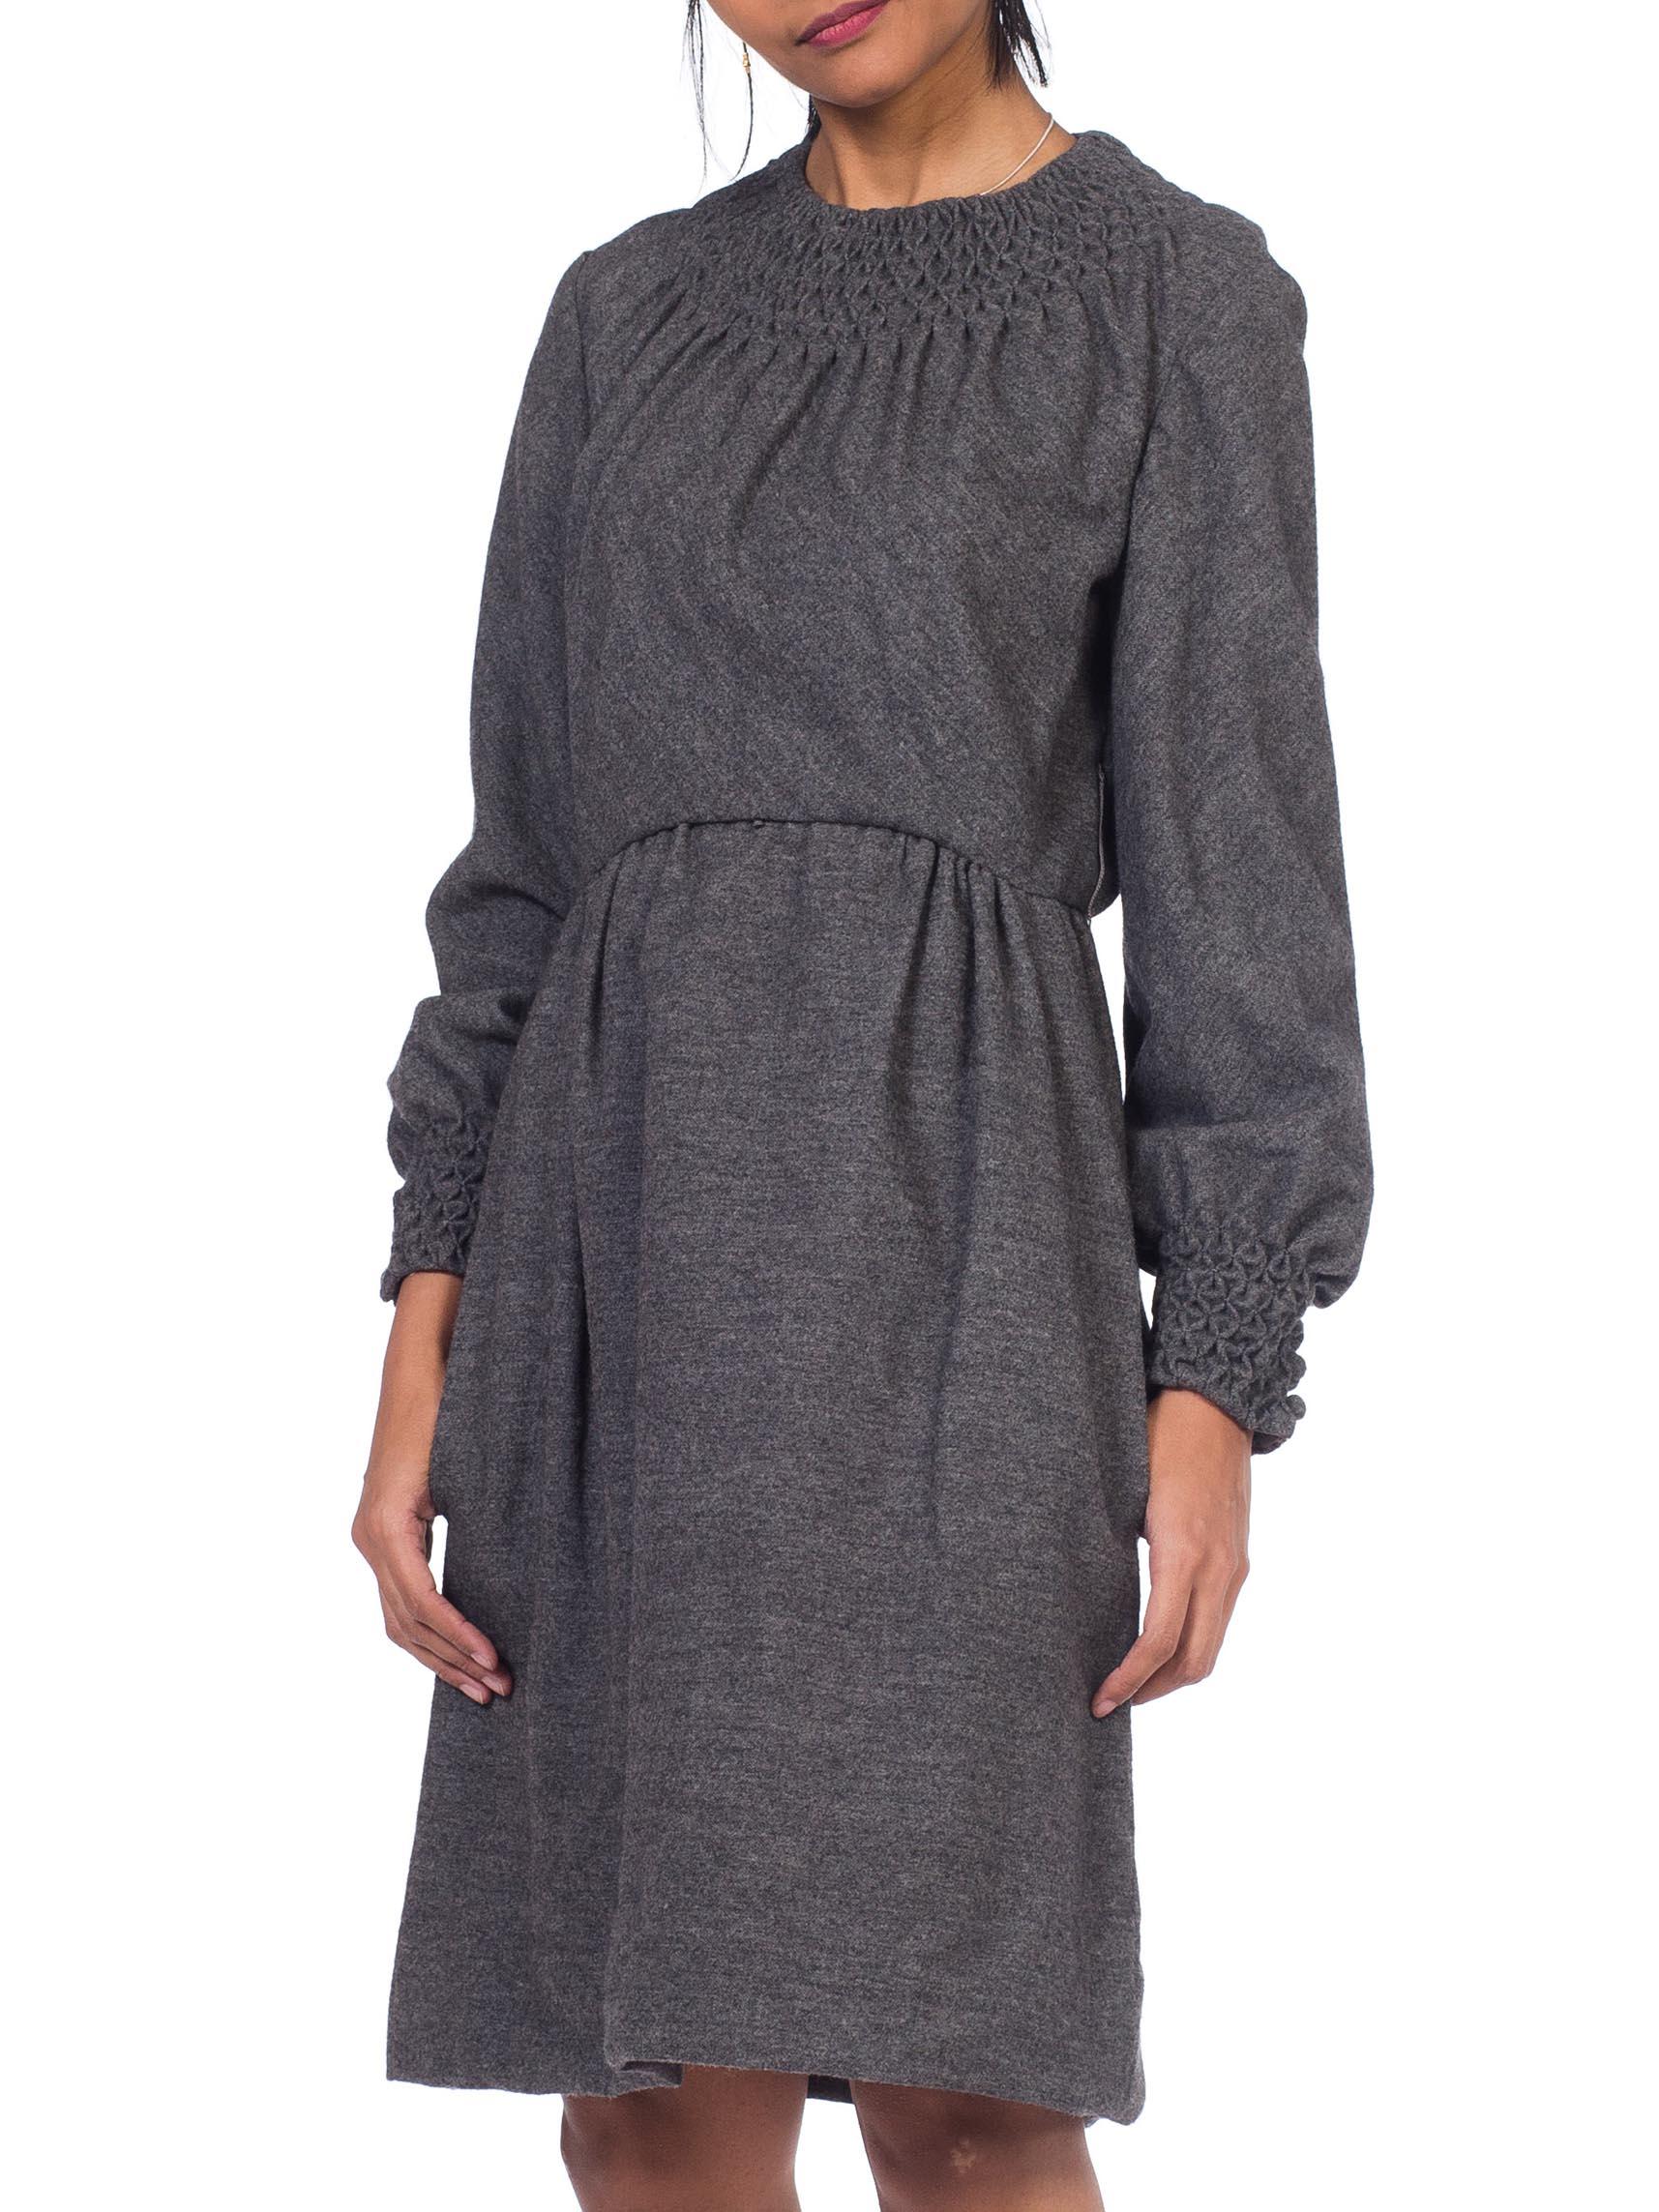 1960S CHESTER WEINBERG Style Grey Wool Dress Lined In Silk With Pockets In Excellent Condition For Sale In New York, NY